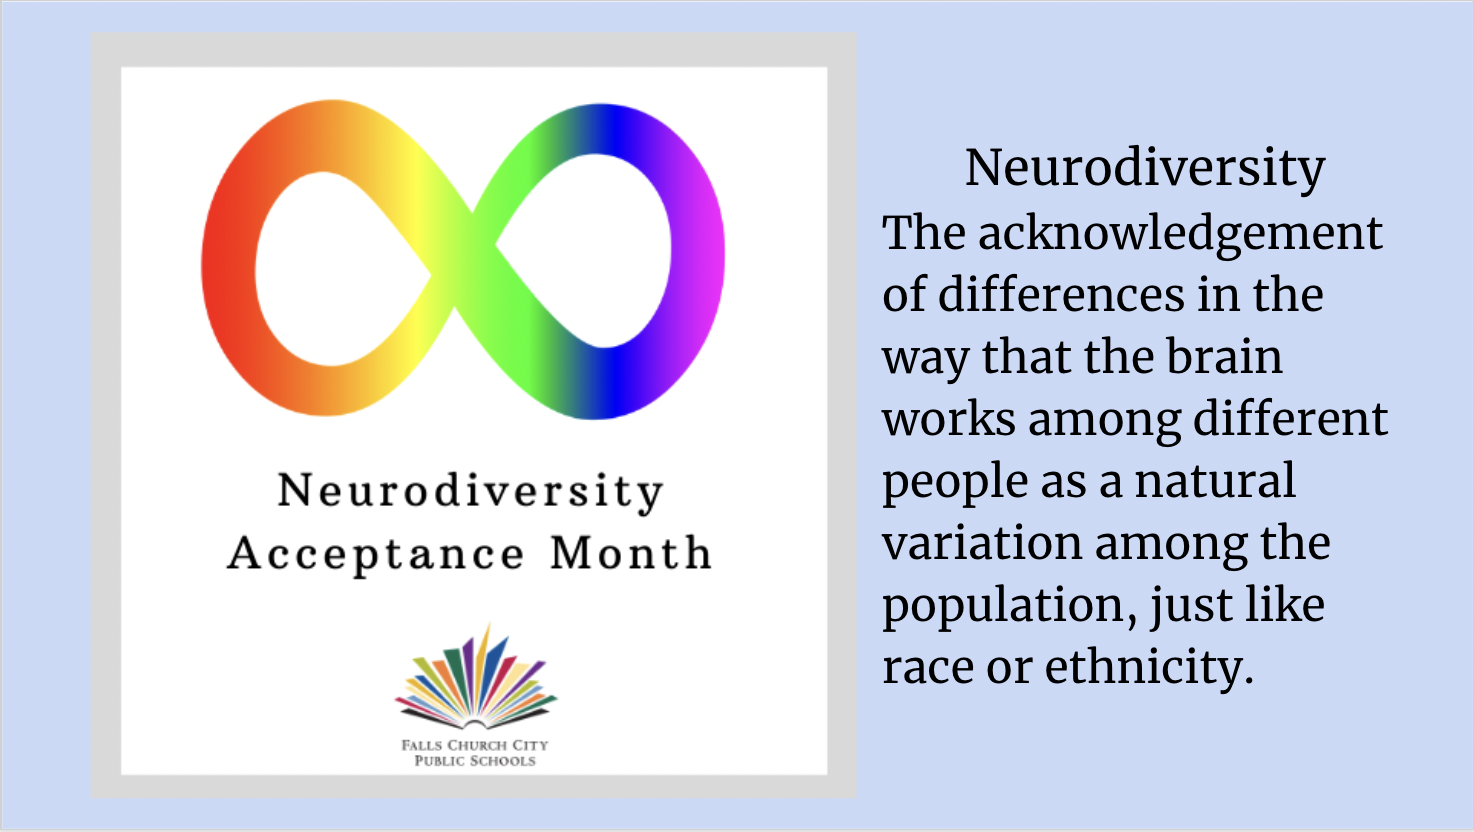 Our History Matters Neurodiversity Acceptance Month Falls Church City